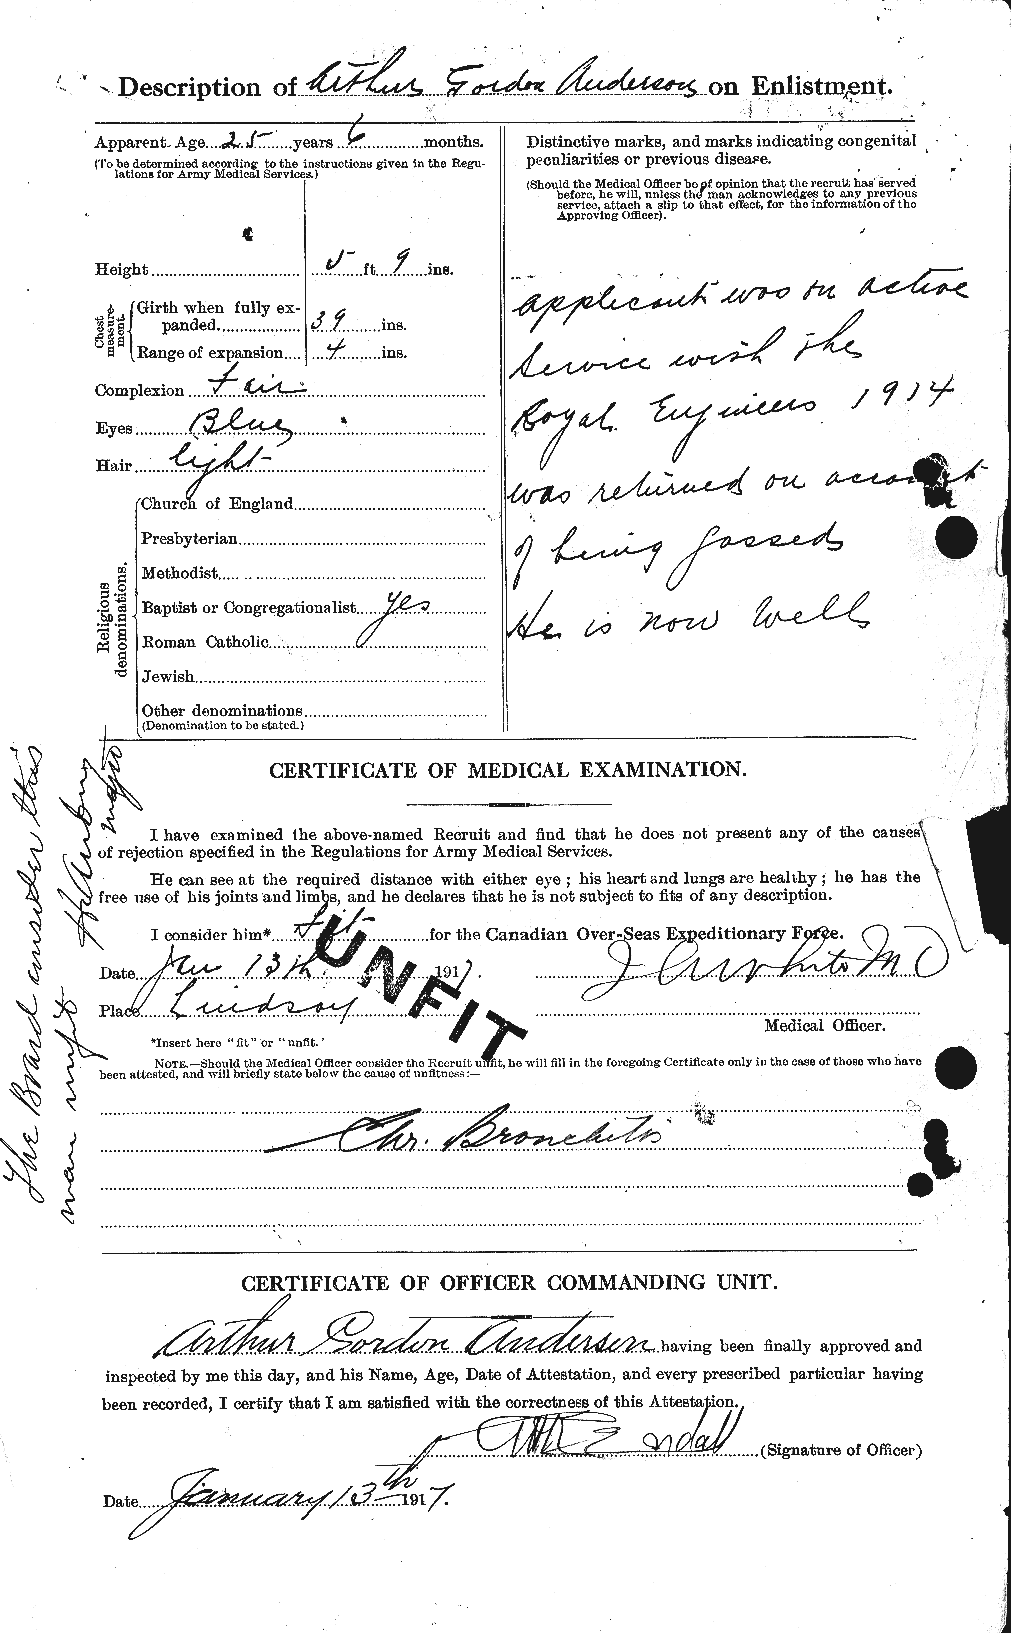 Personnel Records of the First World War - CEF 209356b